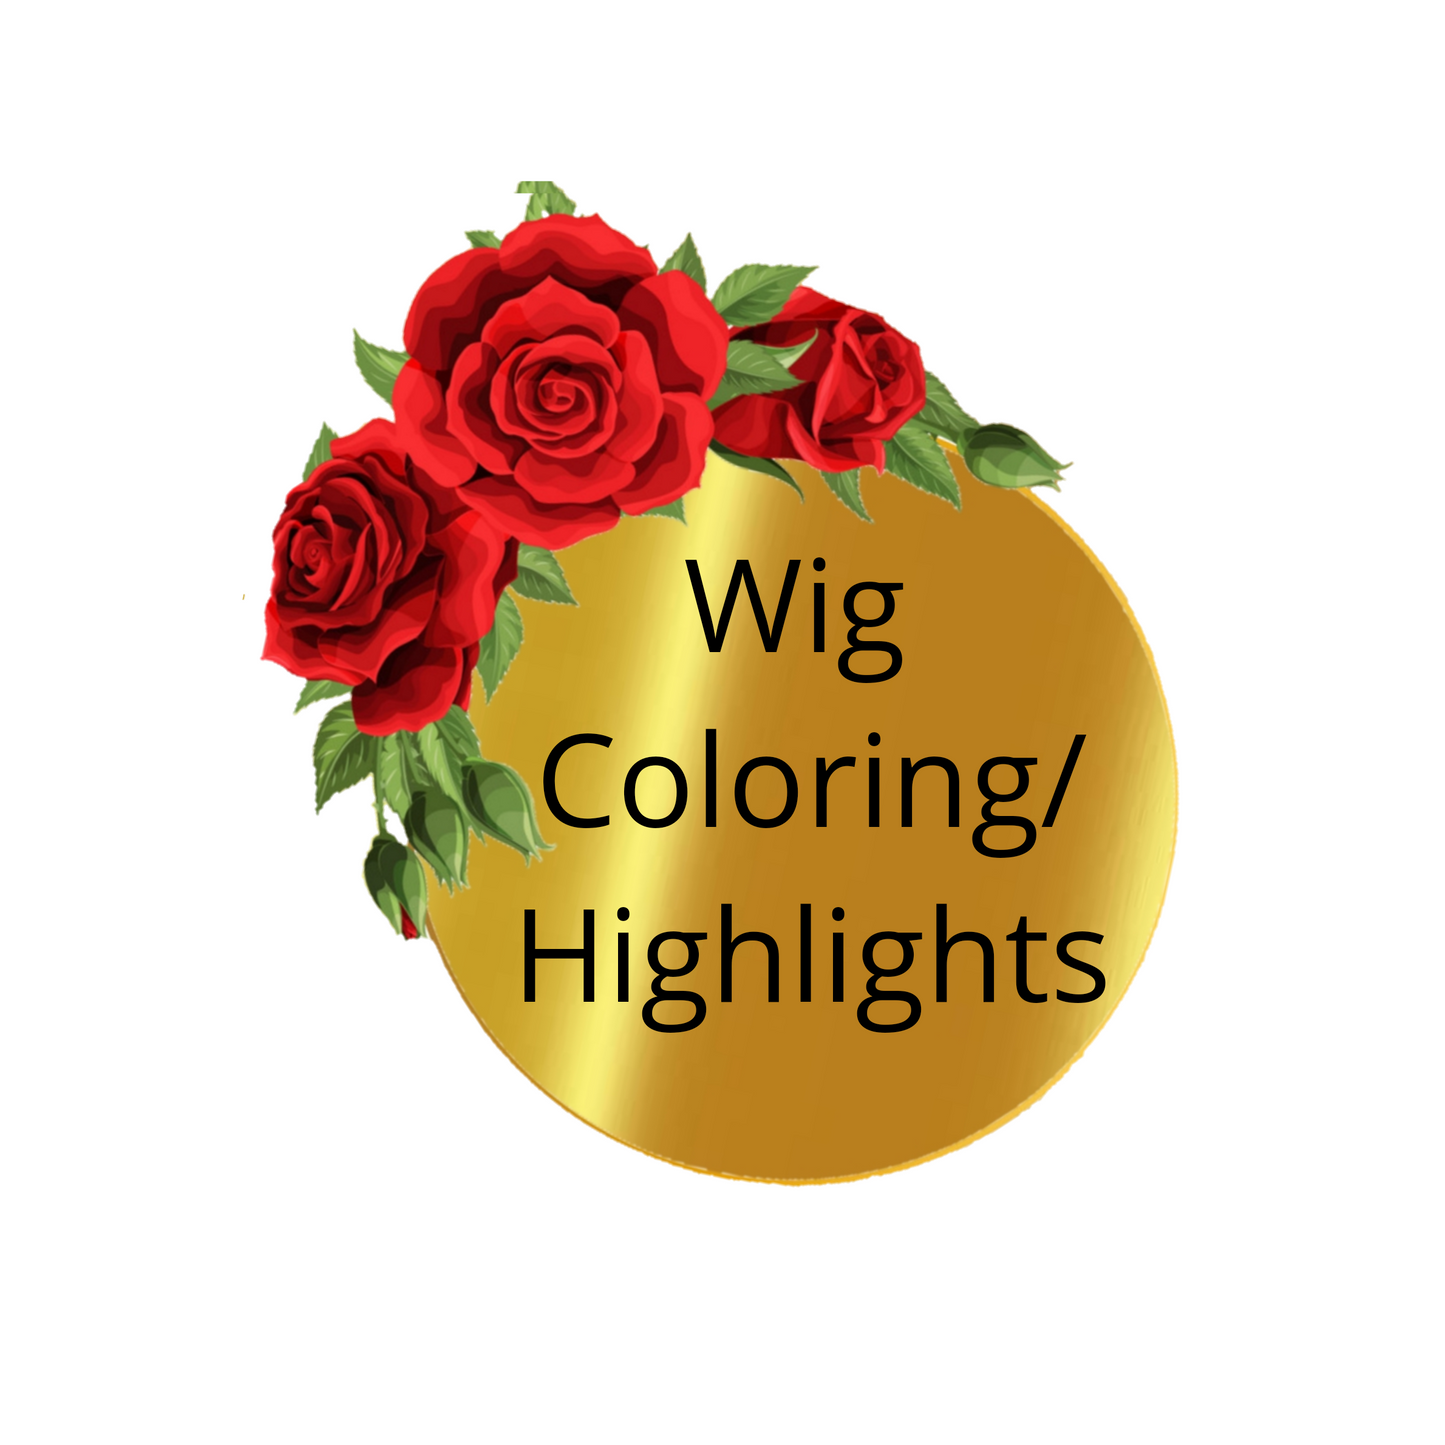 Wig Coloring/Highlights